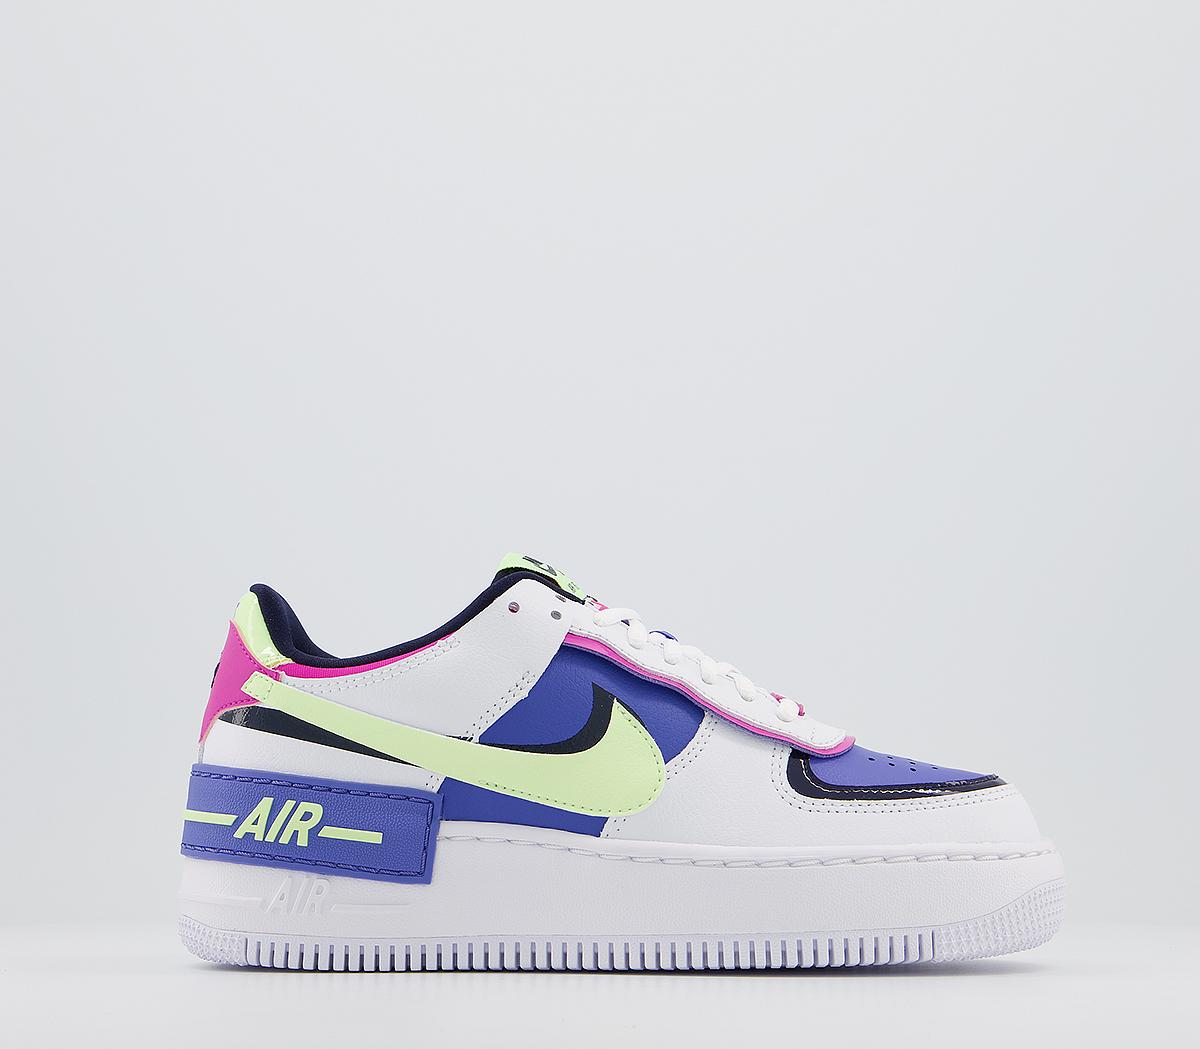 air force 1 shadow white barely volt sapphire fire pink blackened blue